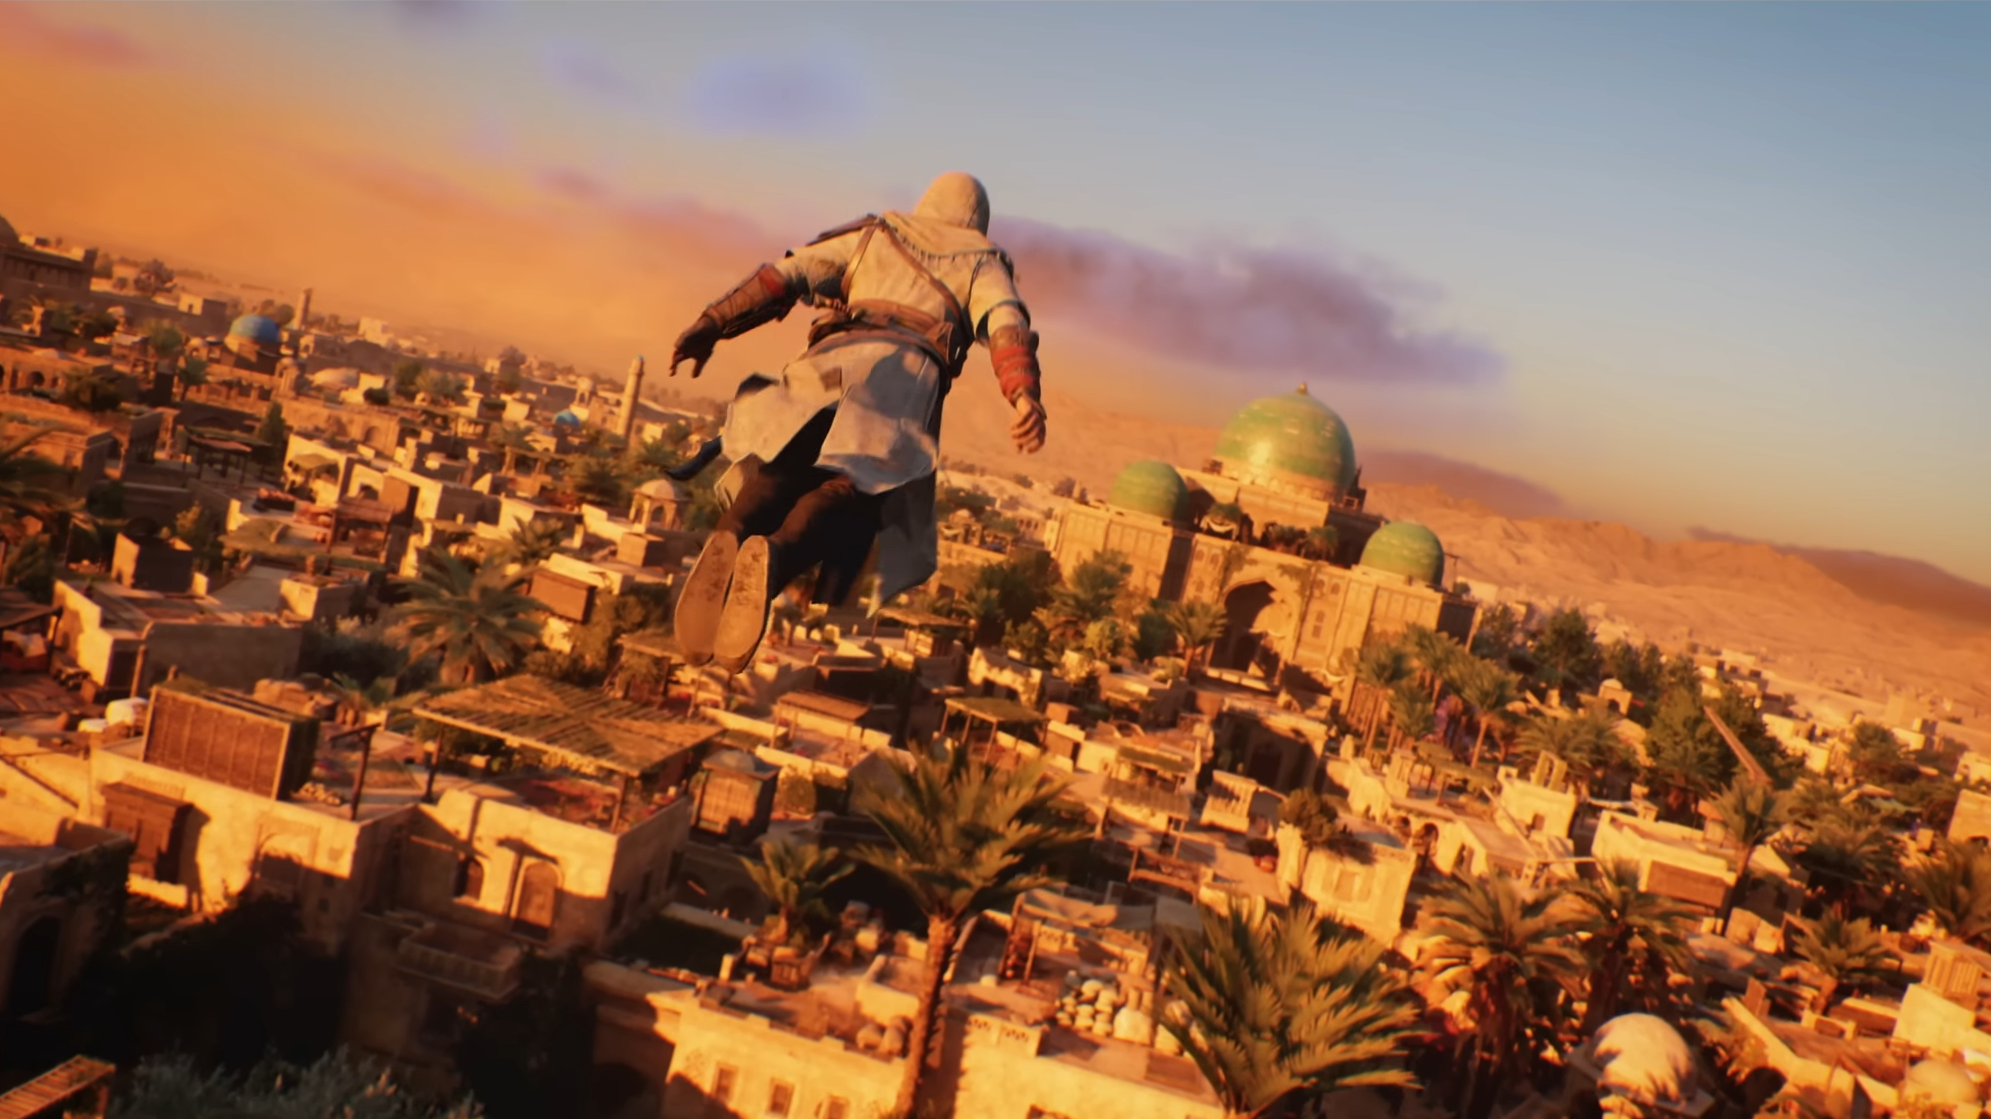 When Assassin's Creed Mirage will be released: early access